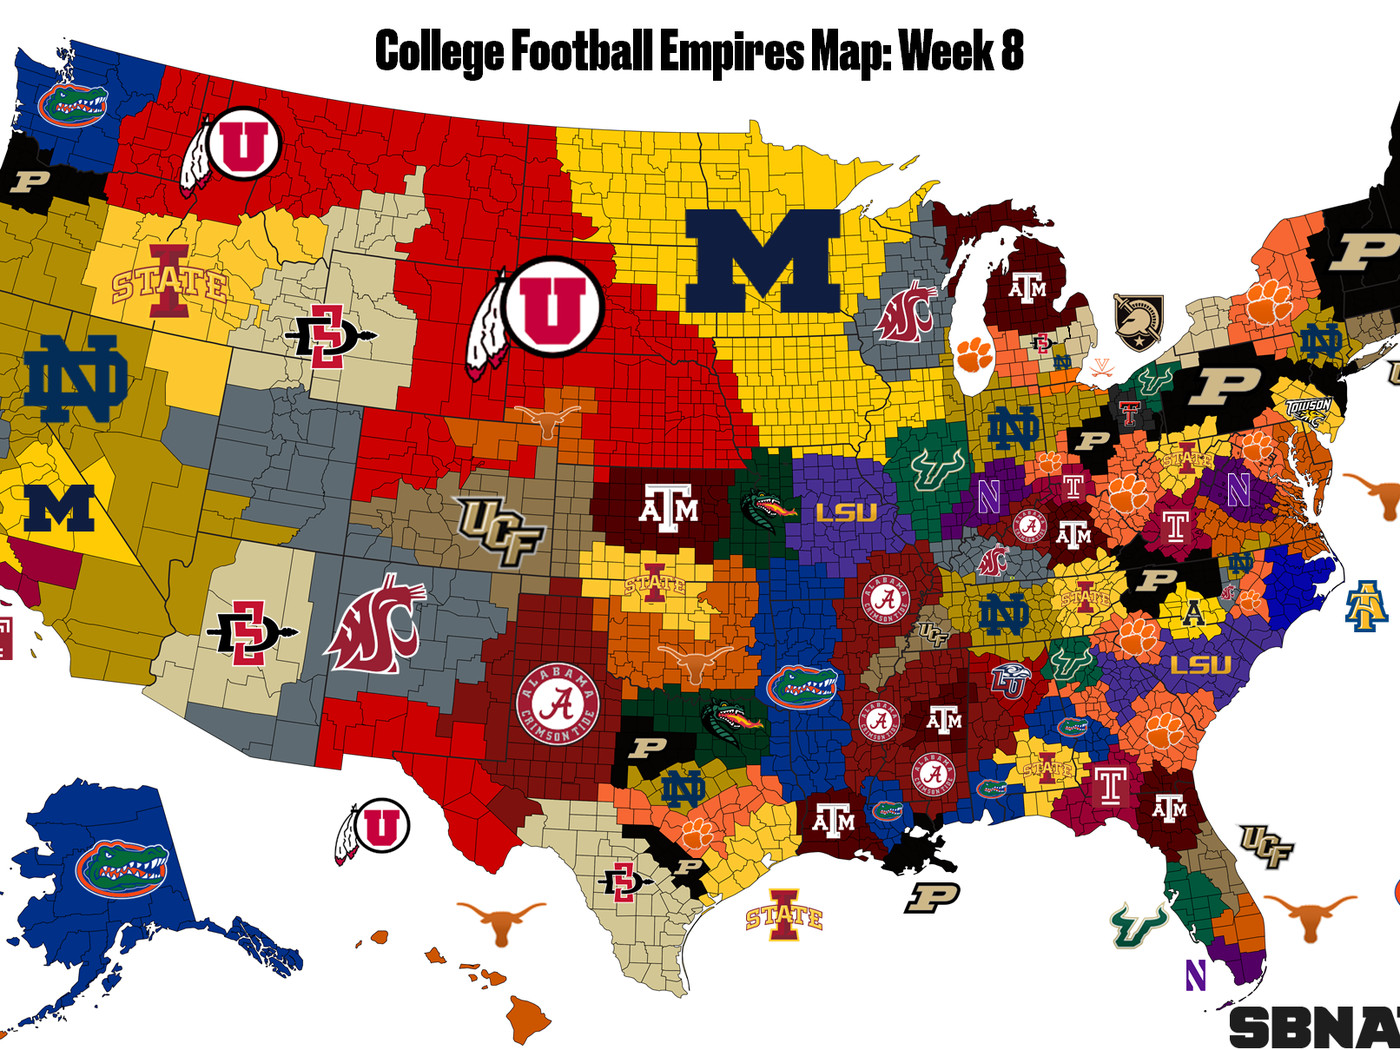 College Football Empires Maps: PURDUE now leads Historic version